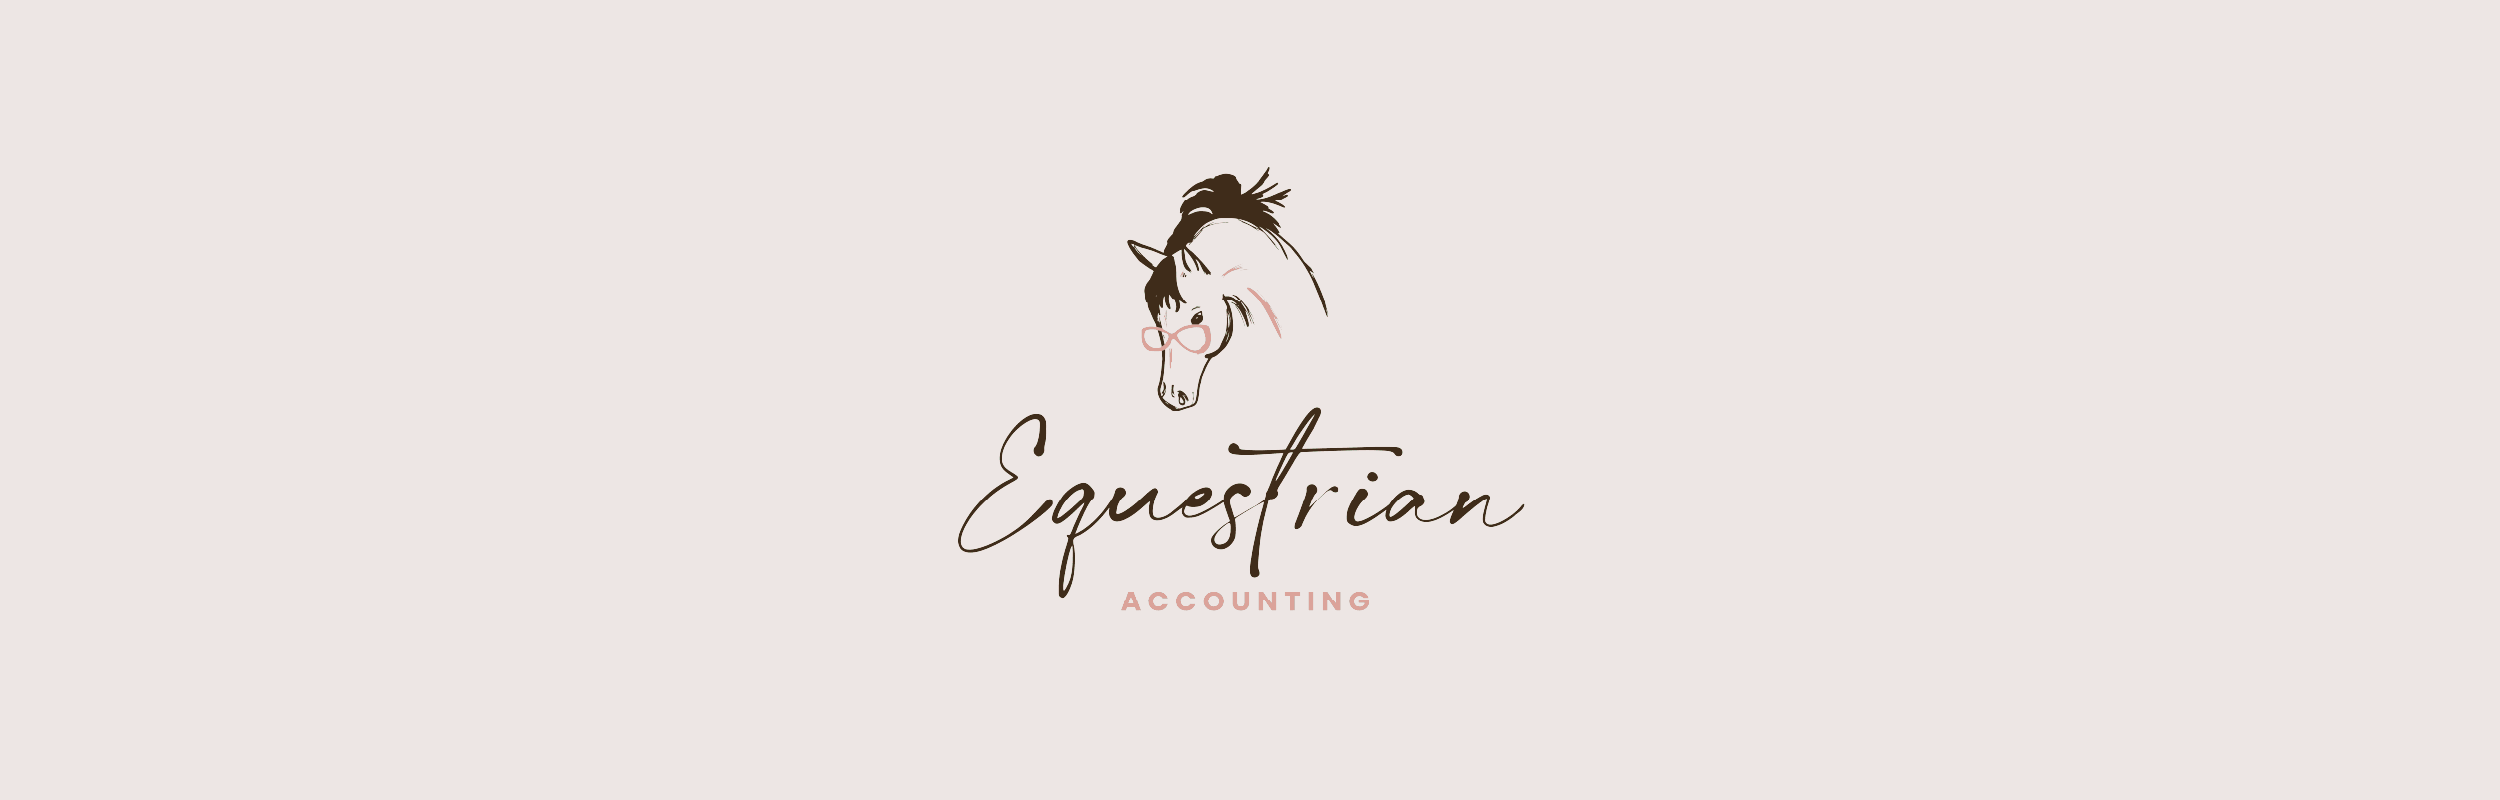 equestrian-accounting